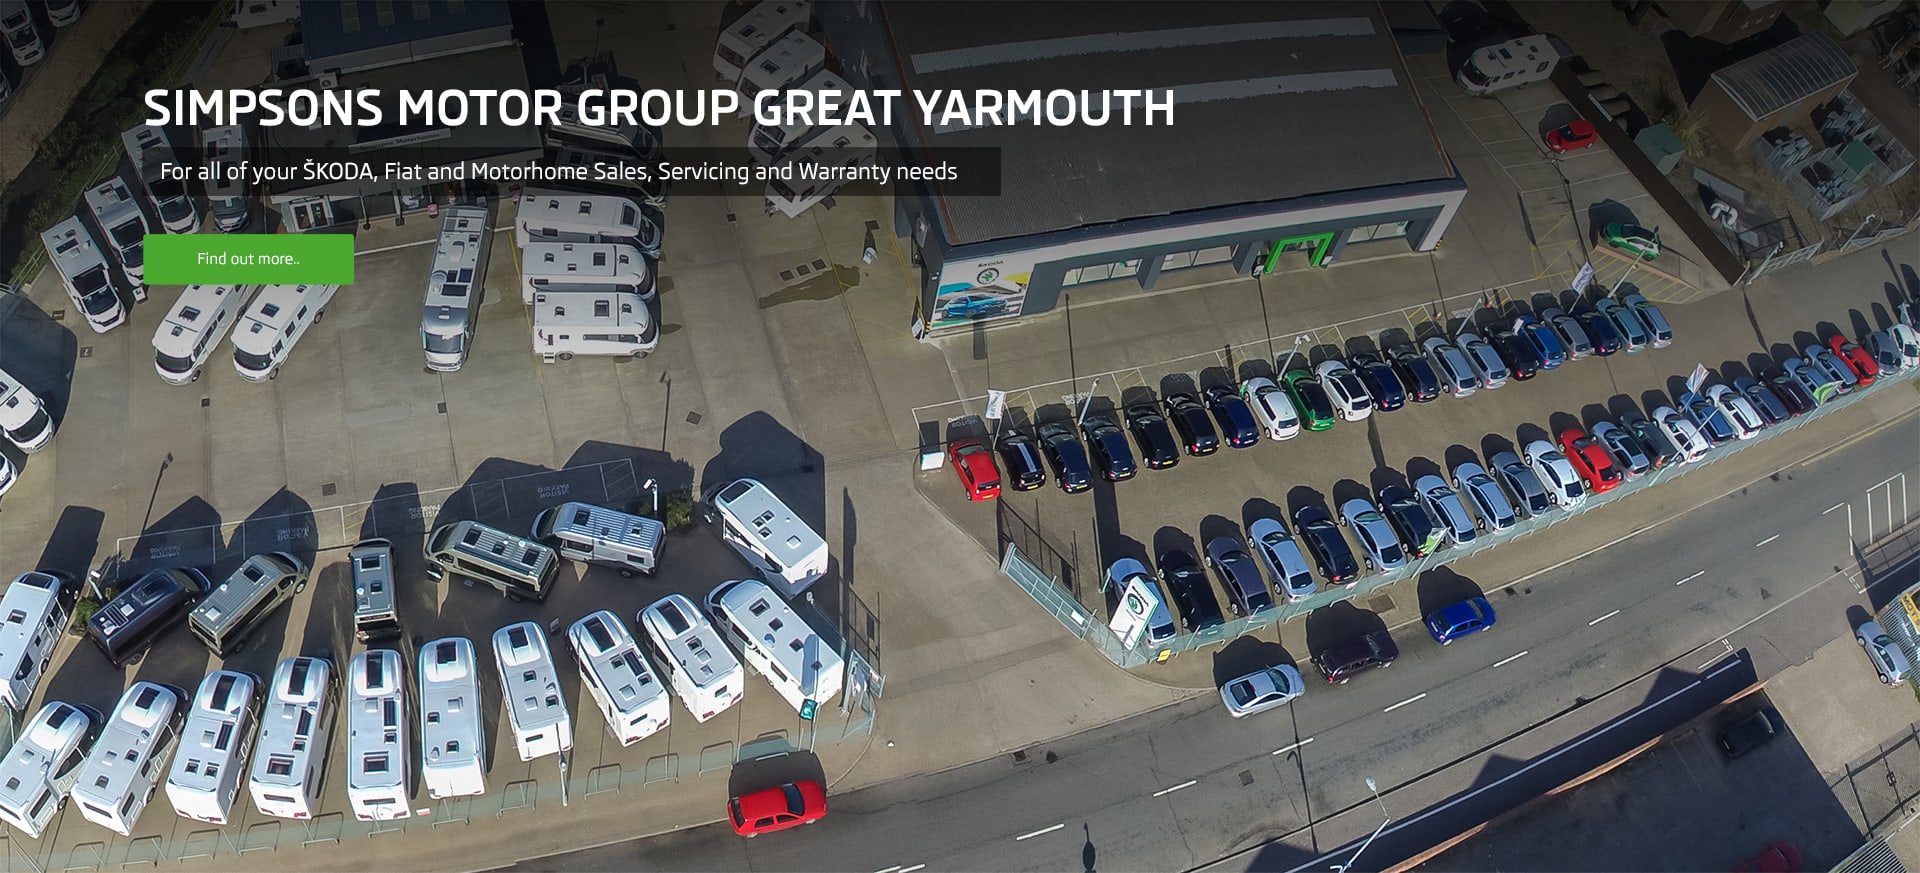 SIMPSONS MOTOR GROUP GREAT YARMOUTH